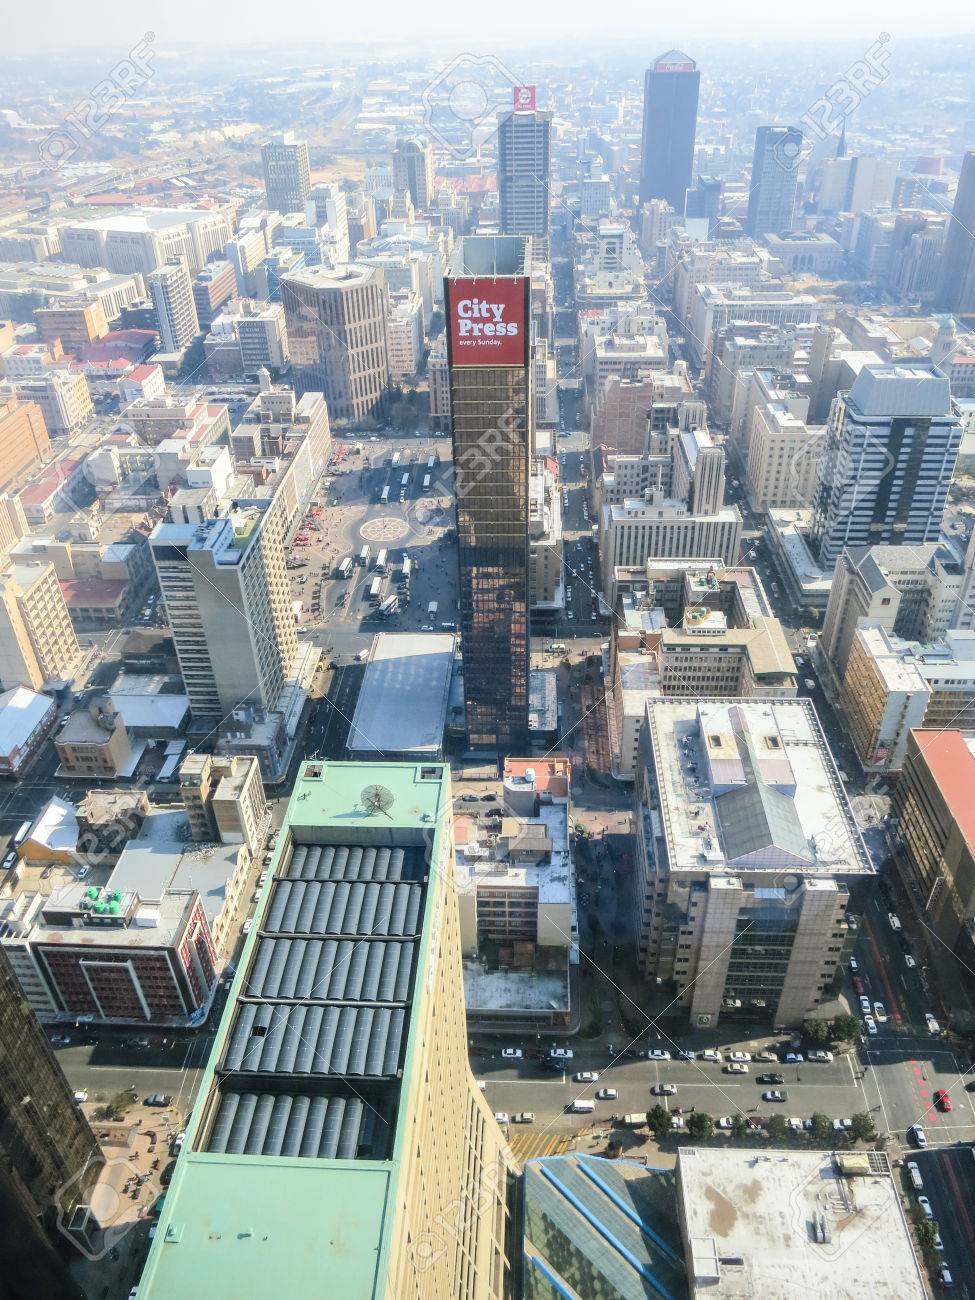 31649567-johannesburg-south-africa-may-31-2013-view-from-the-carlton-centre-50th-floor-top-of-...jpg